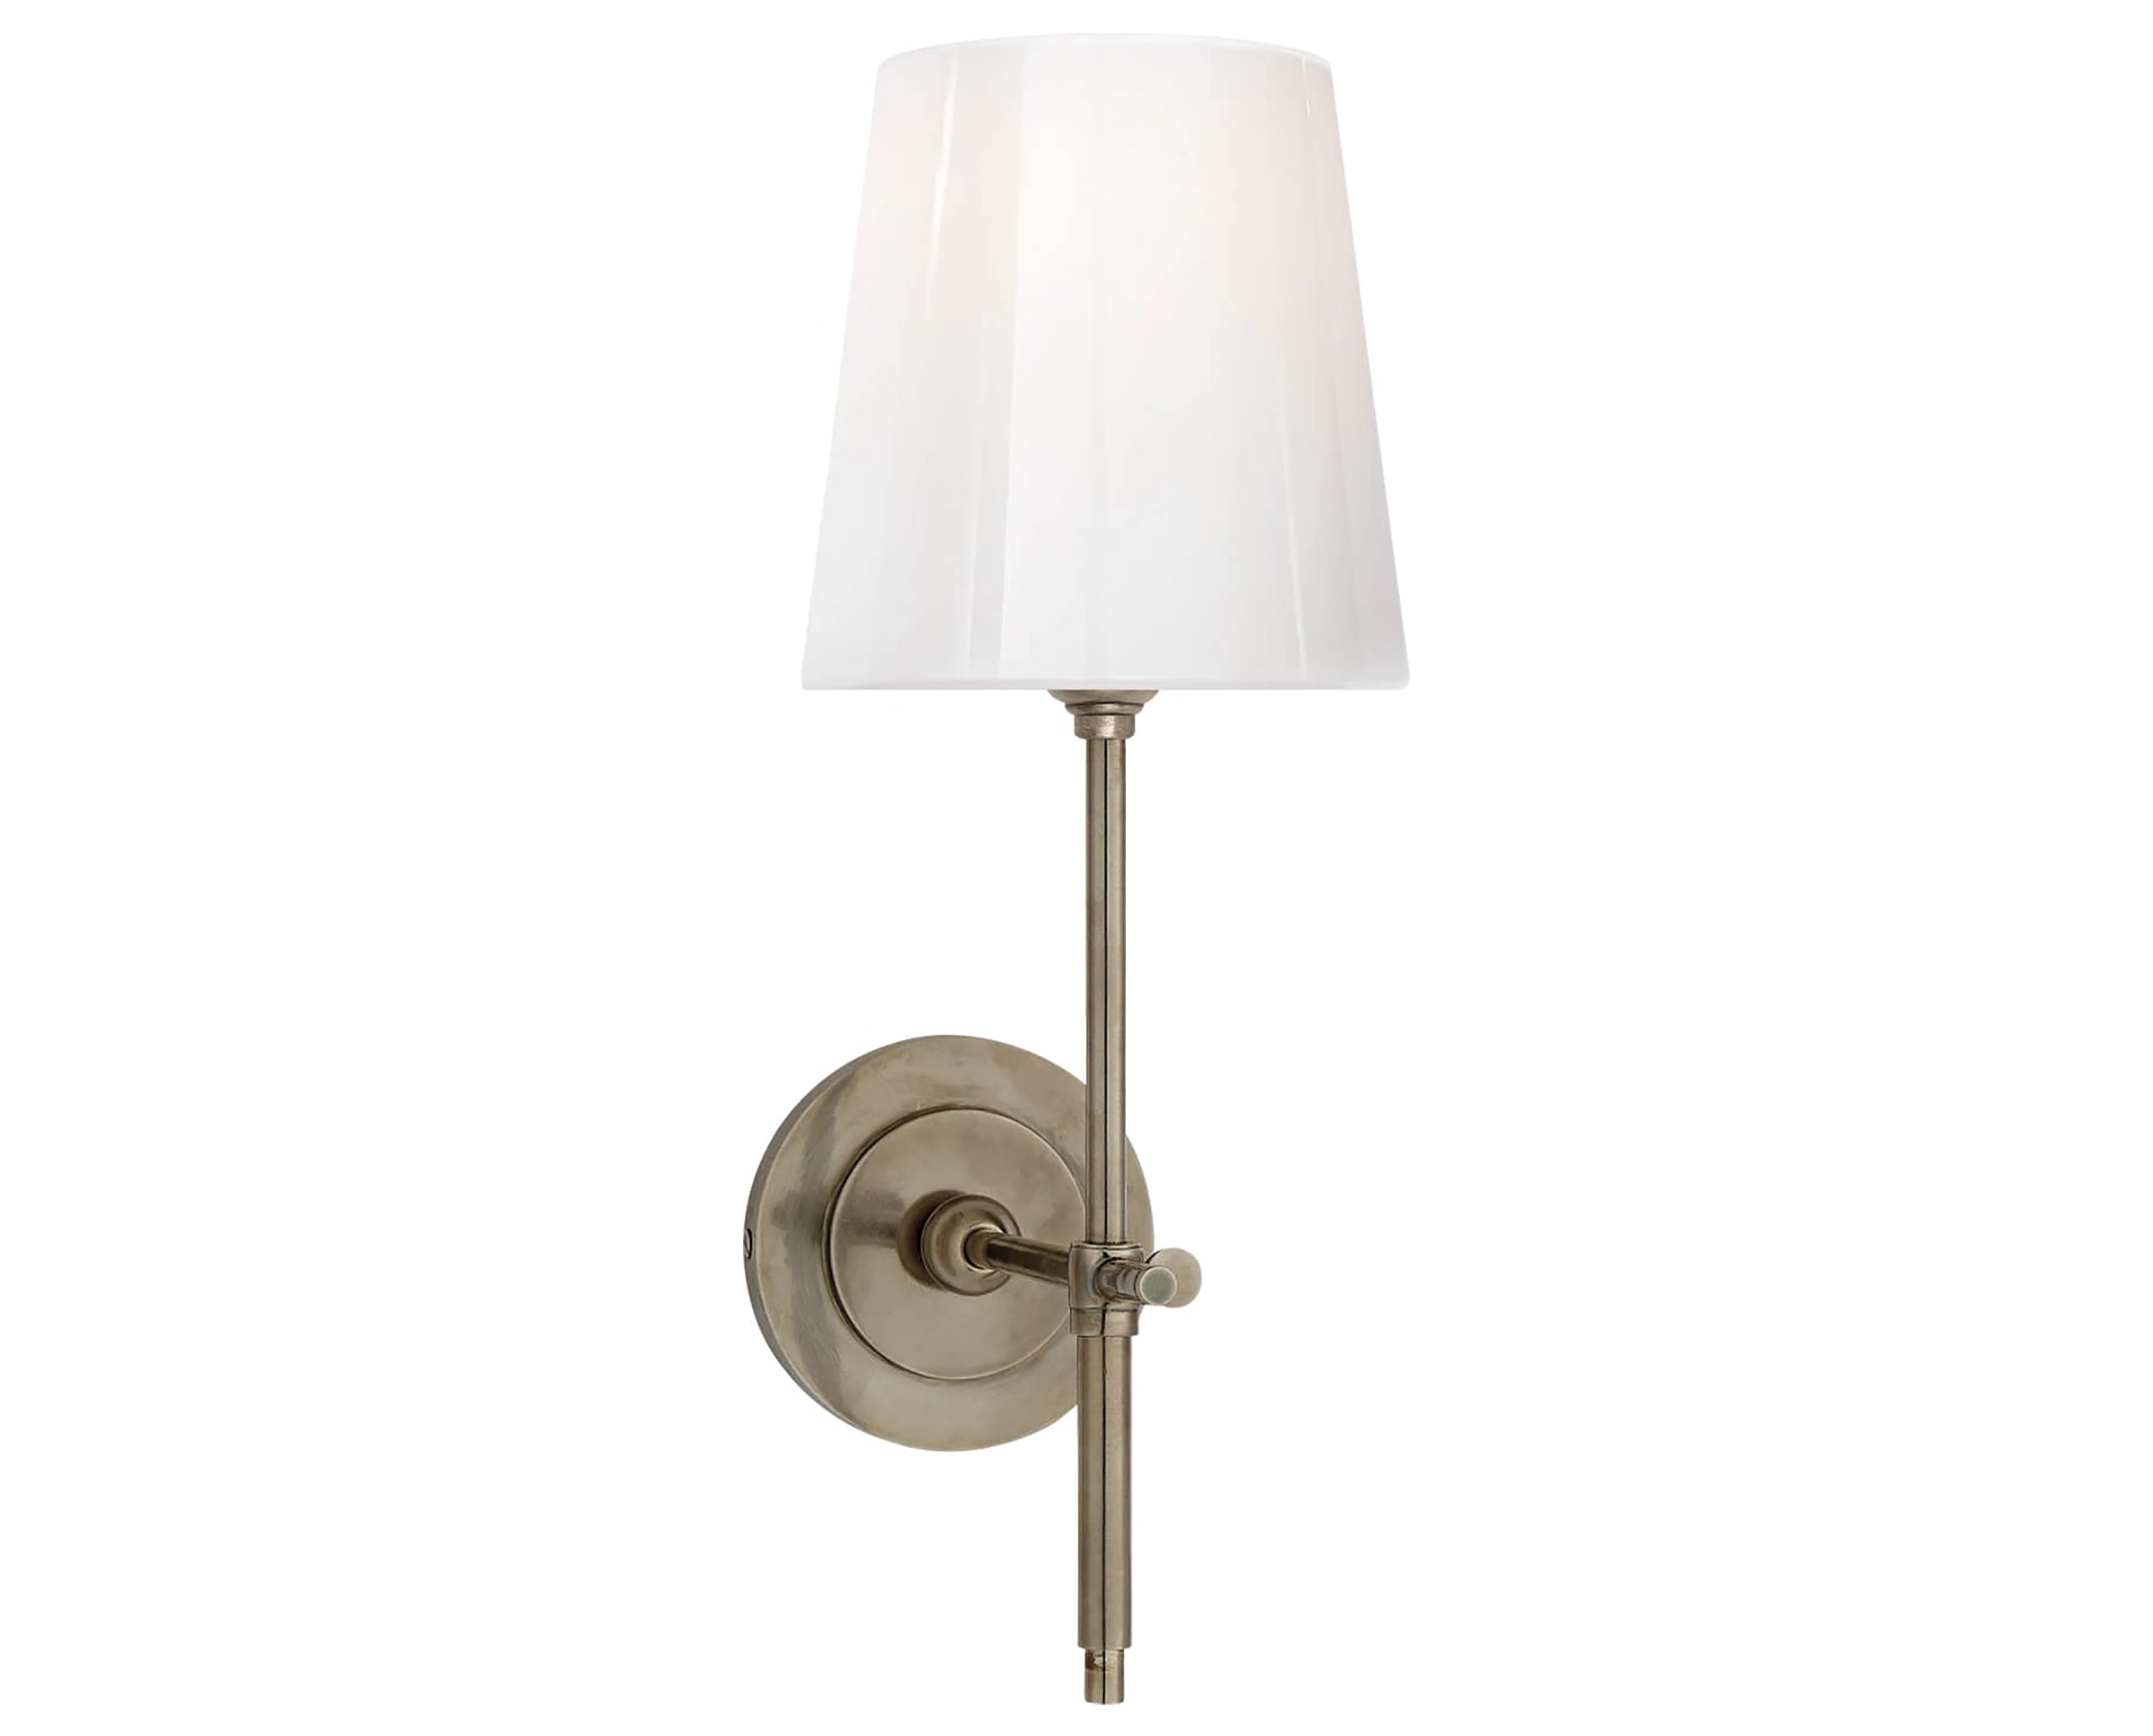 Antique Nickel and White Glass | Bryant Sconce - White Glass Shade | Valley Ridge Furniture